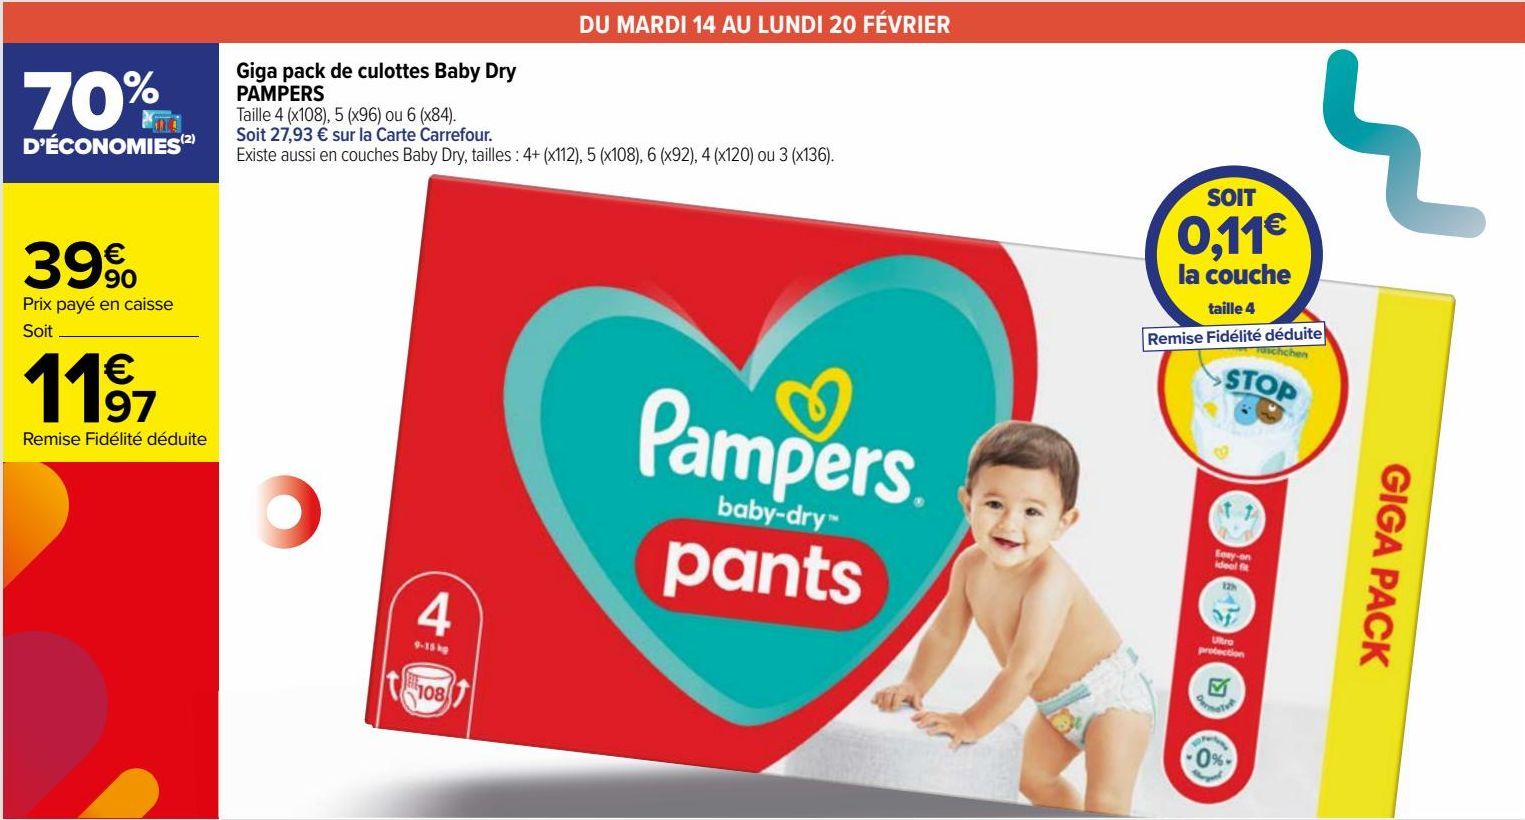 Giga pack de culottes Baby Dry PAMPERS 